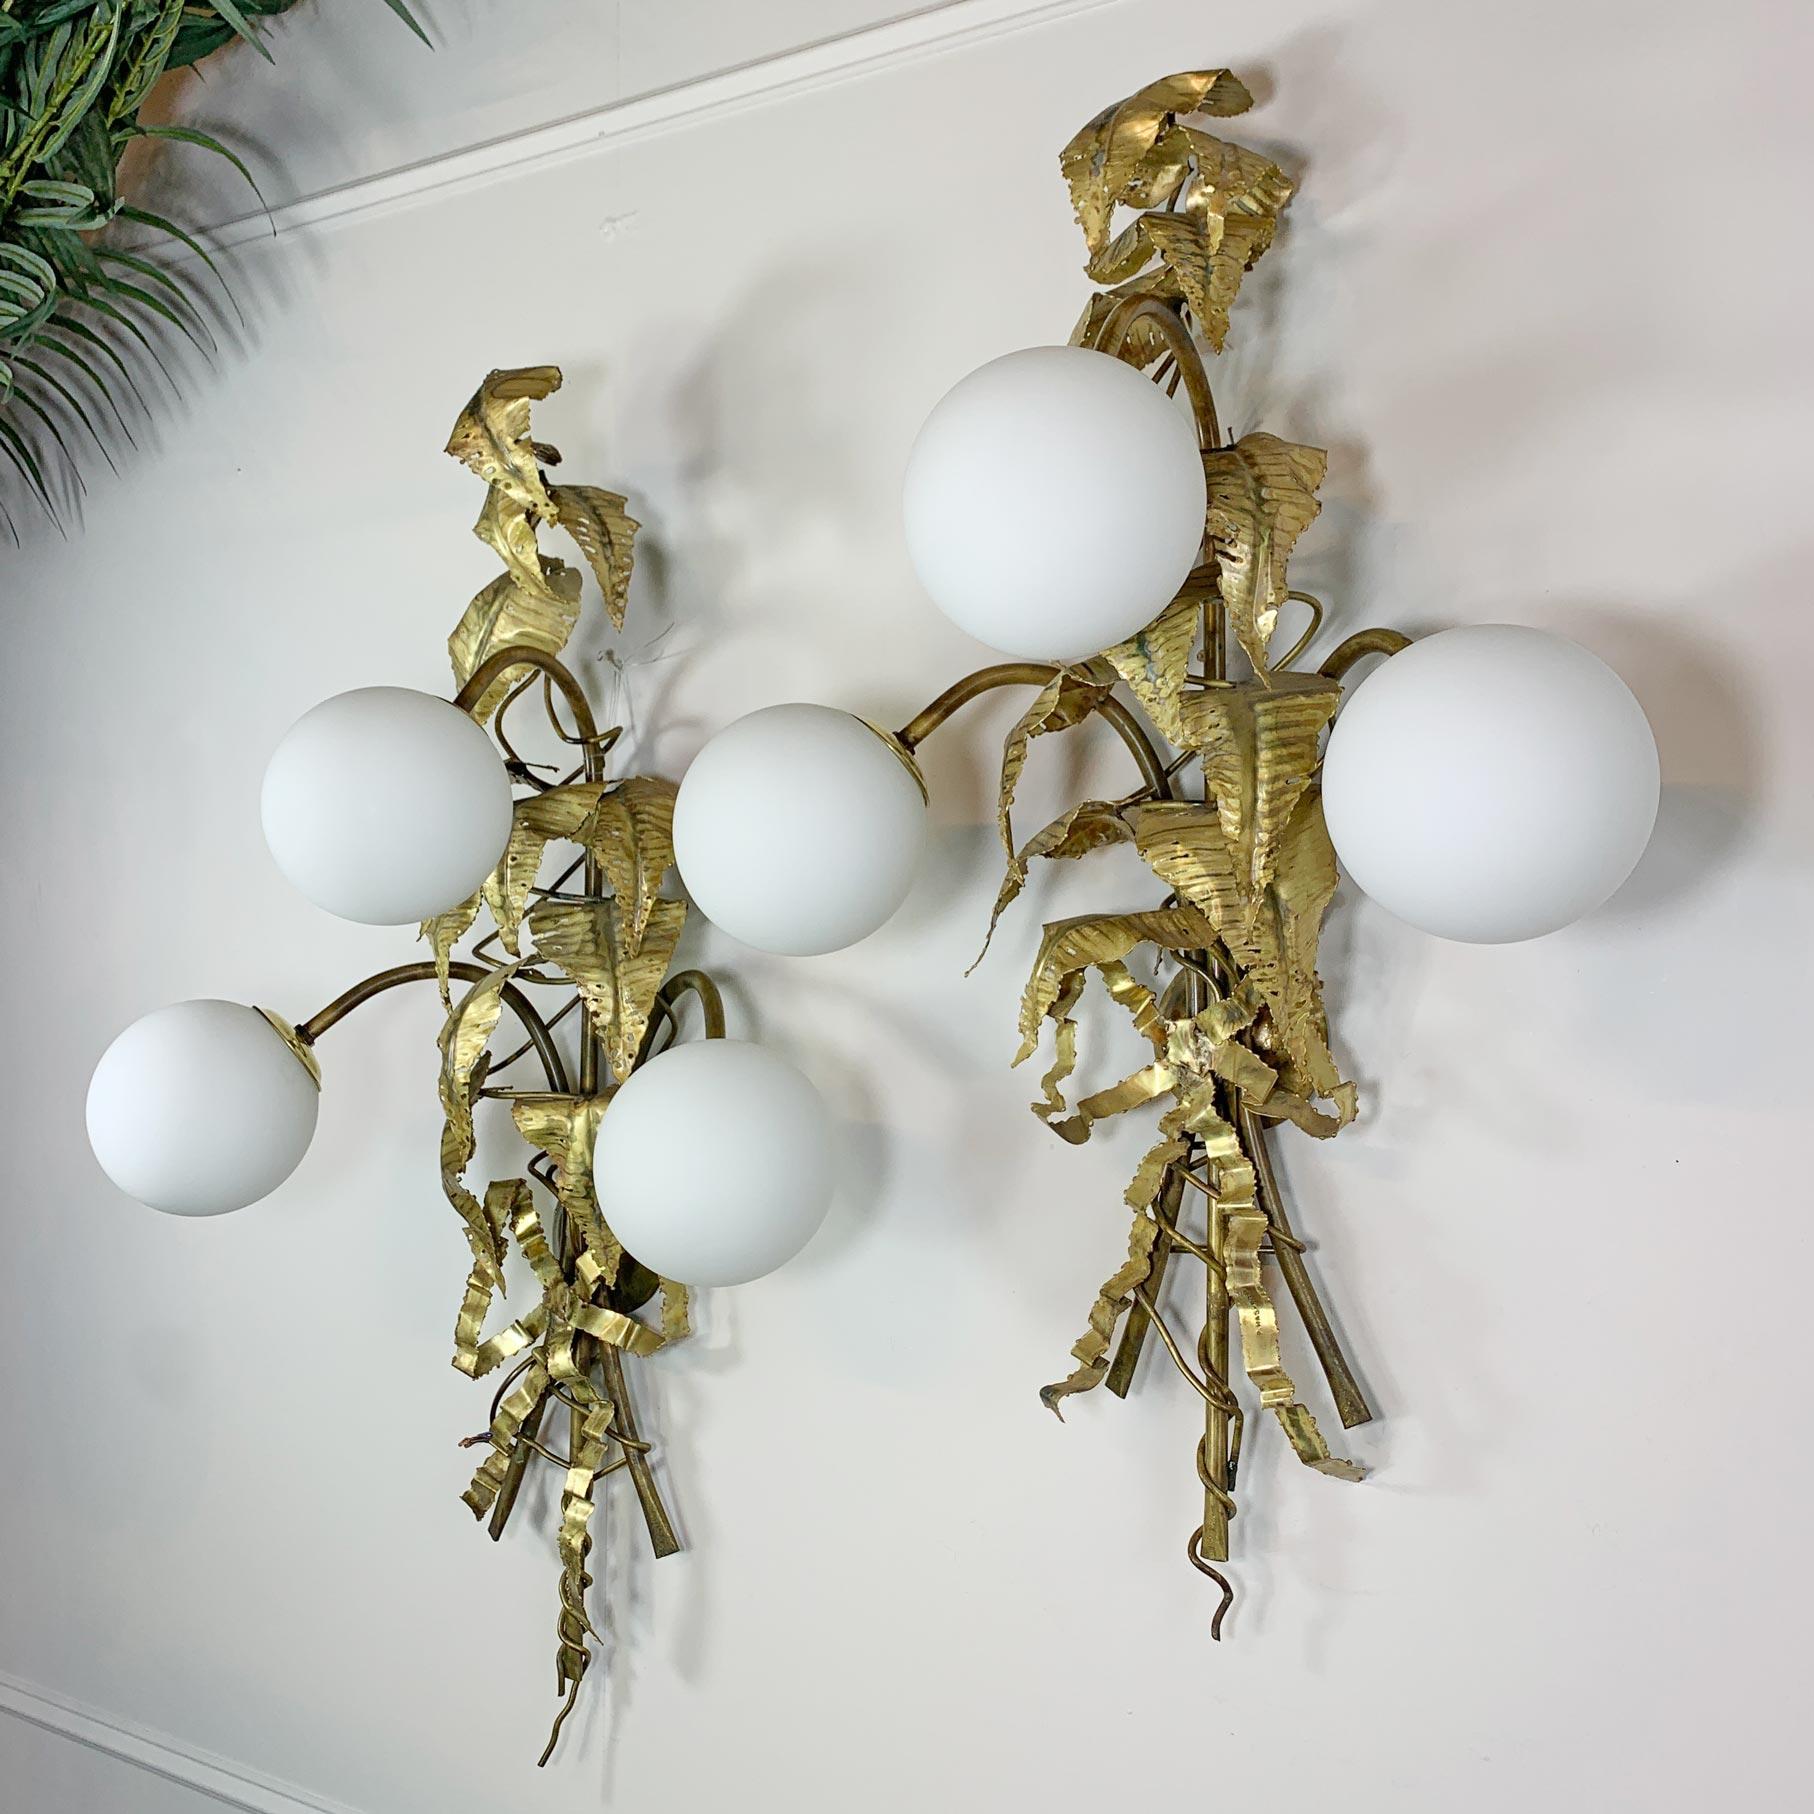 Hand-Crafted Signed P. Mas Rossi Naturalistic Gold Leaf Wall Lights For Sale